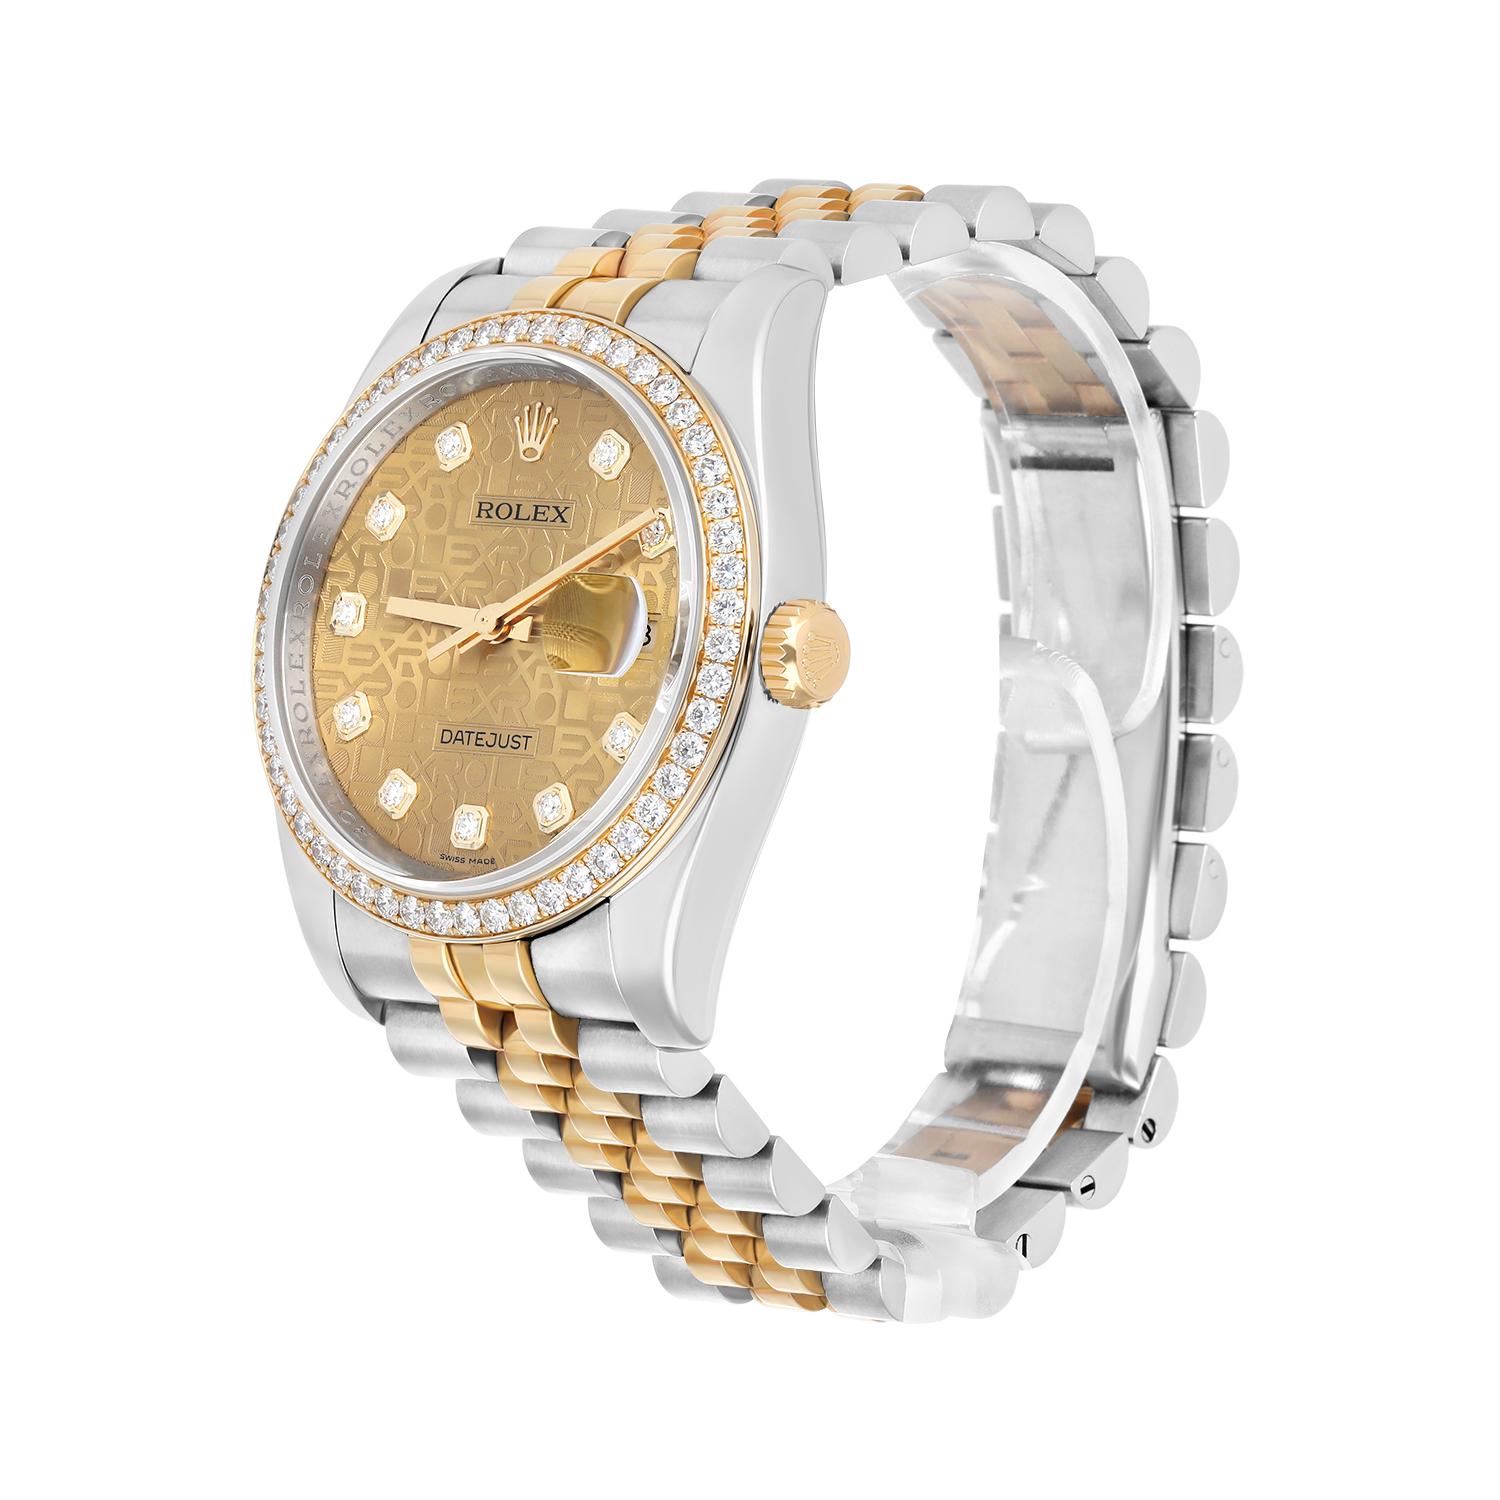 Rolex Datejust 36mm Yellow Gold & Steel Champagne Jubilee Diamond Dial 116243 For Sale 1